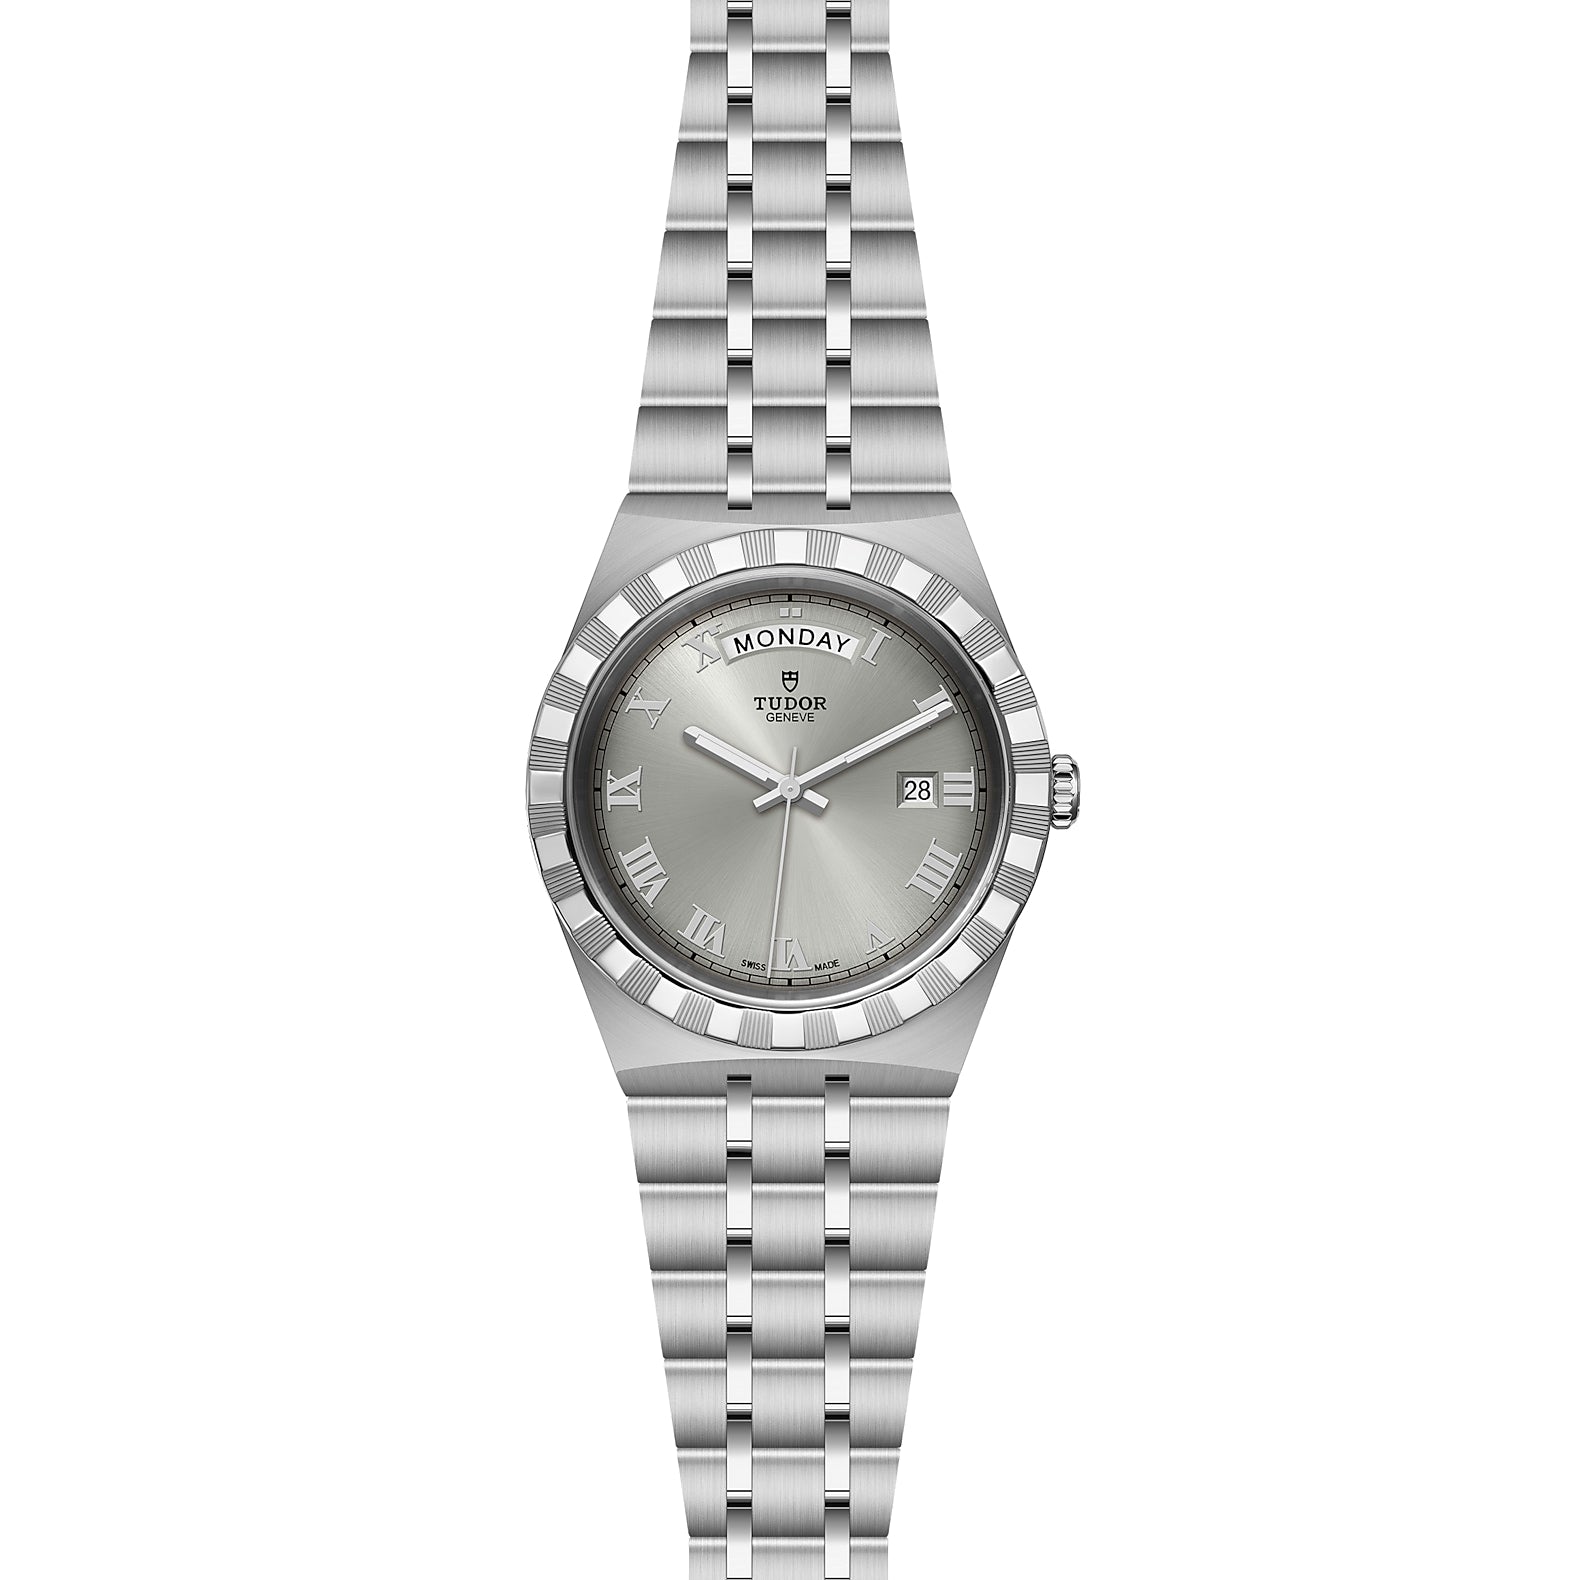 Tudor Royal Day/Date Watch, 41mm Silver Dial, M28600-0001